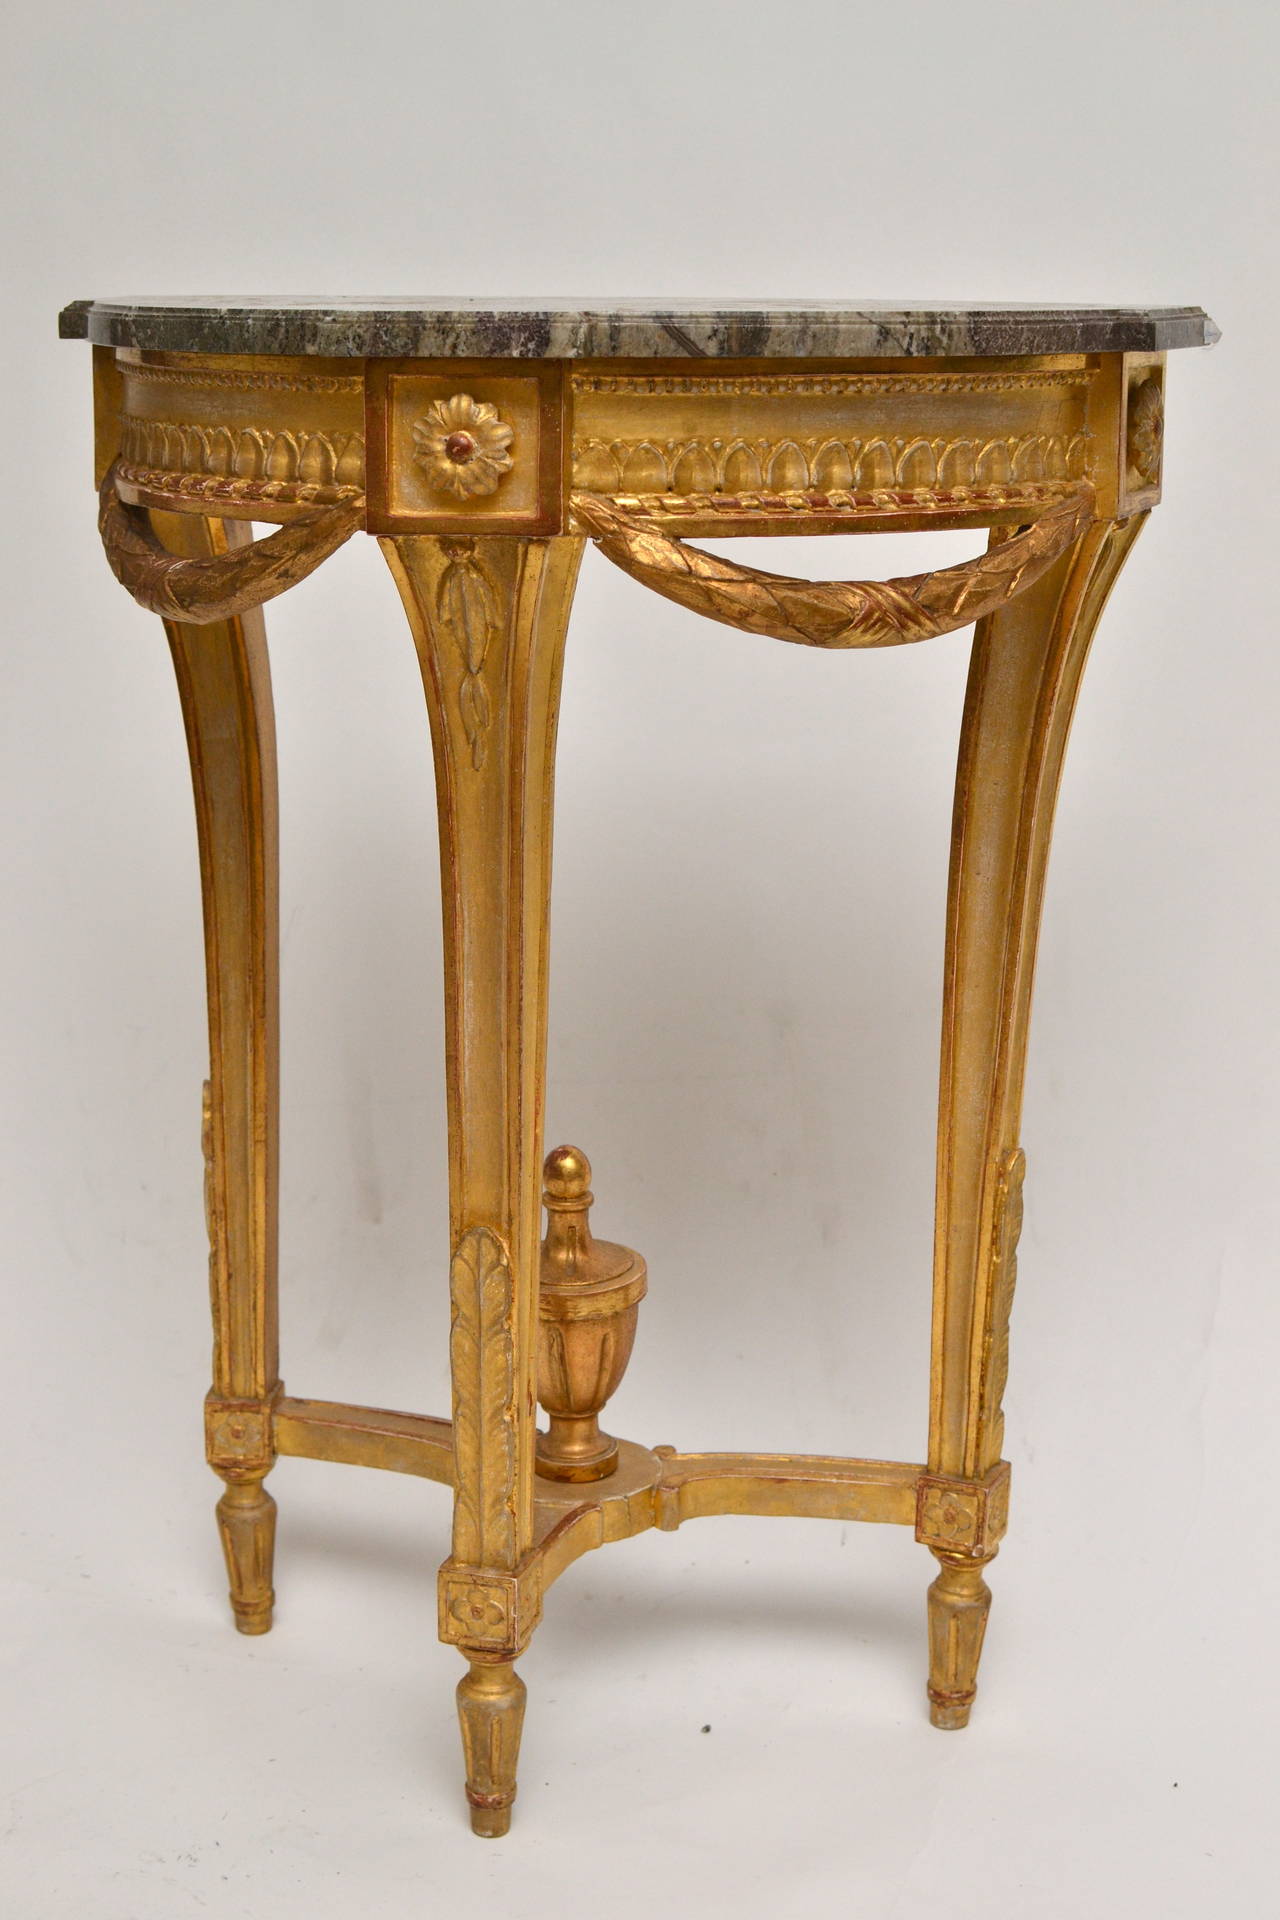 An unusually small Gustavian carved giltwood console table with a marble top made in Stockholm, circa 1790.